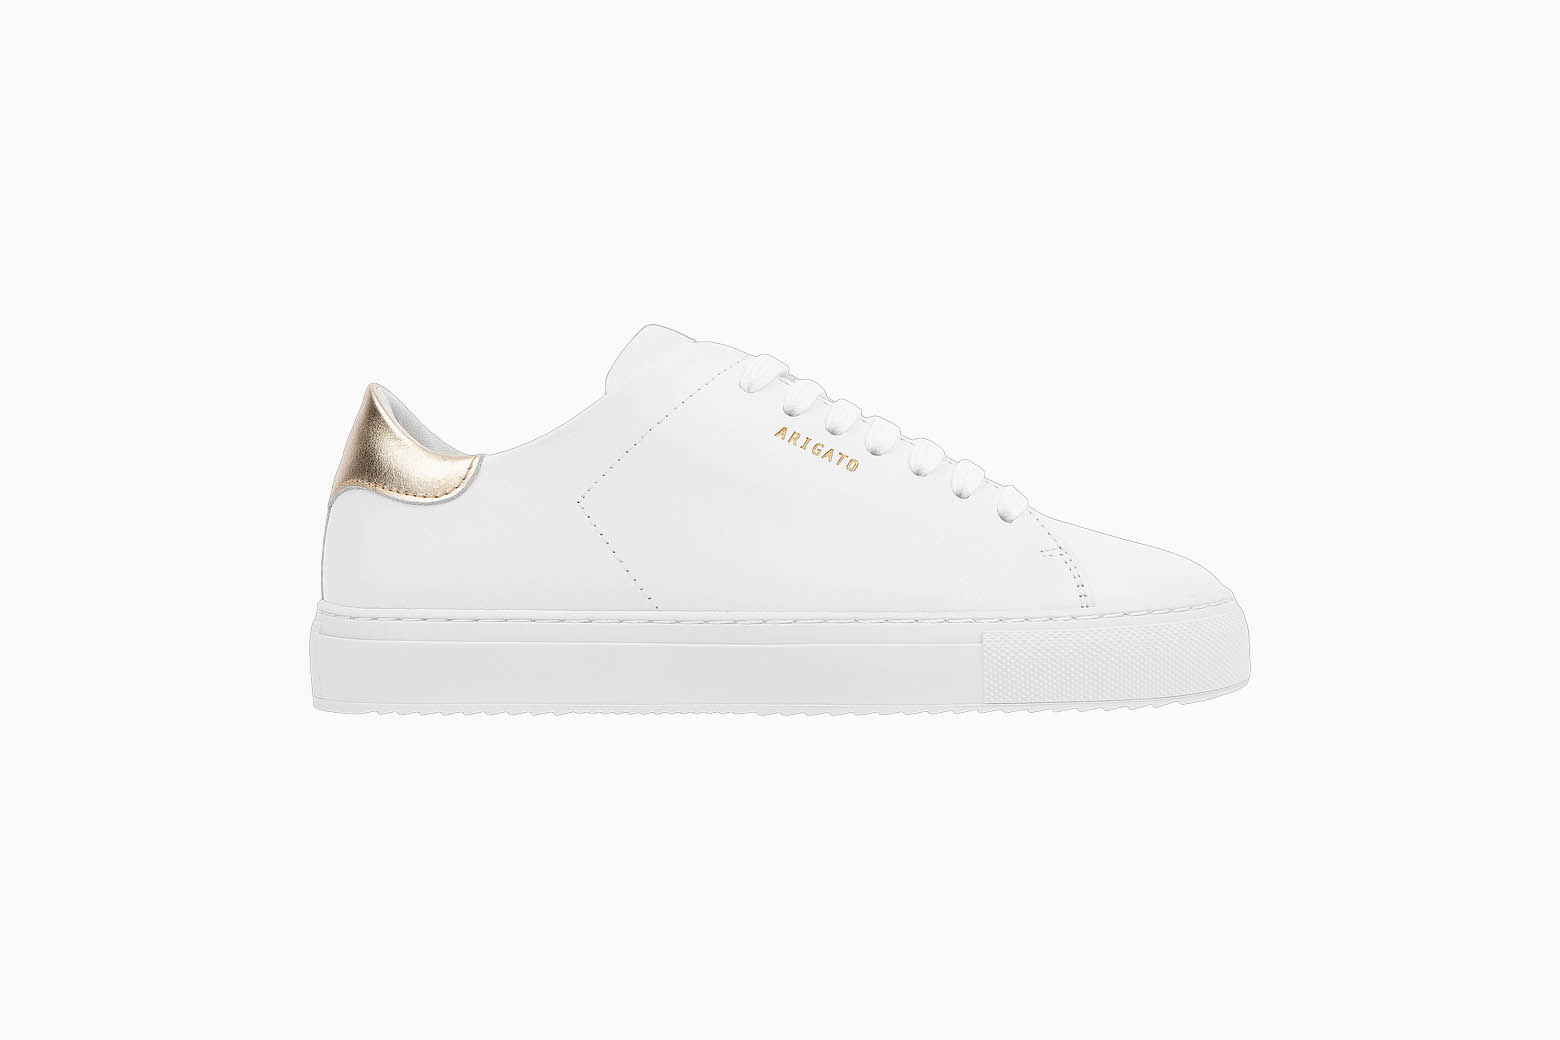 The Best White Sneakers Stylish Women Need Style Guide 8381